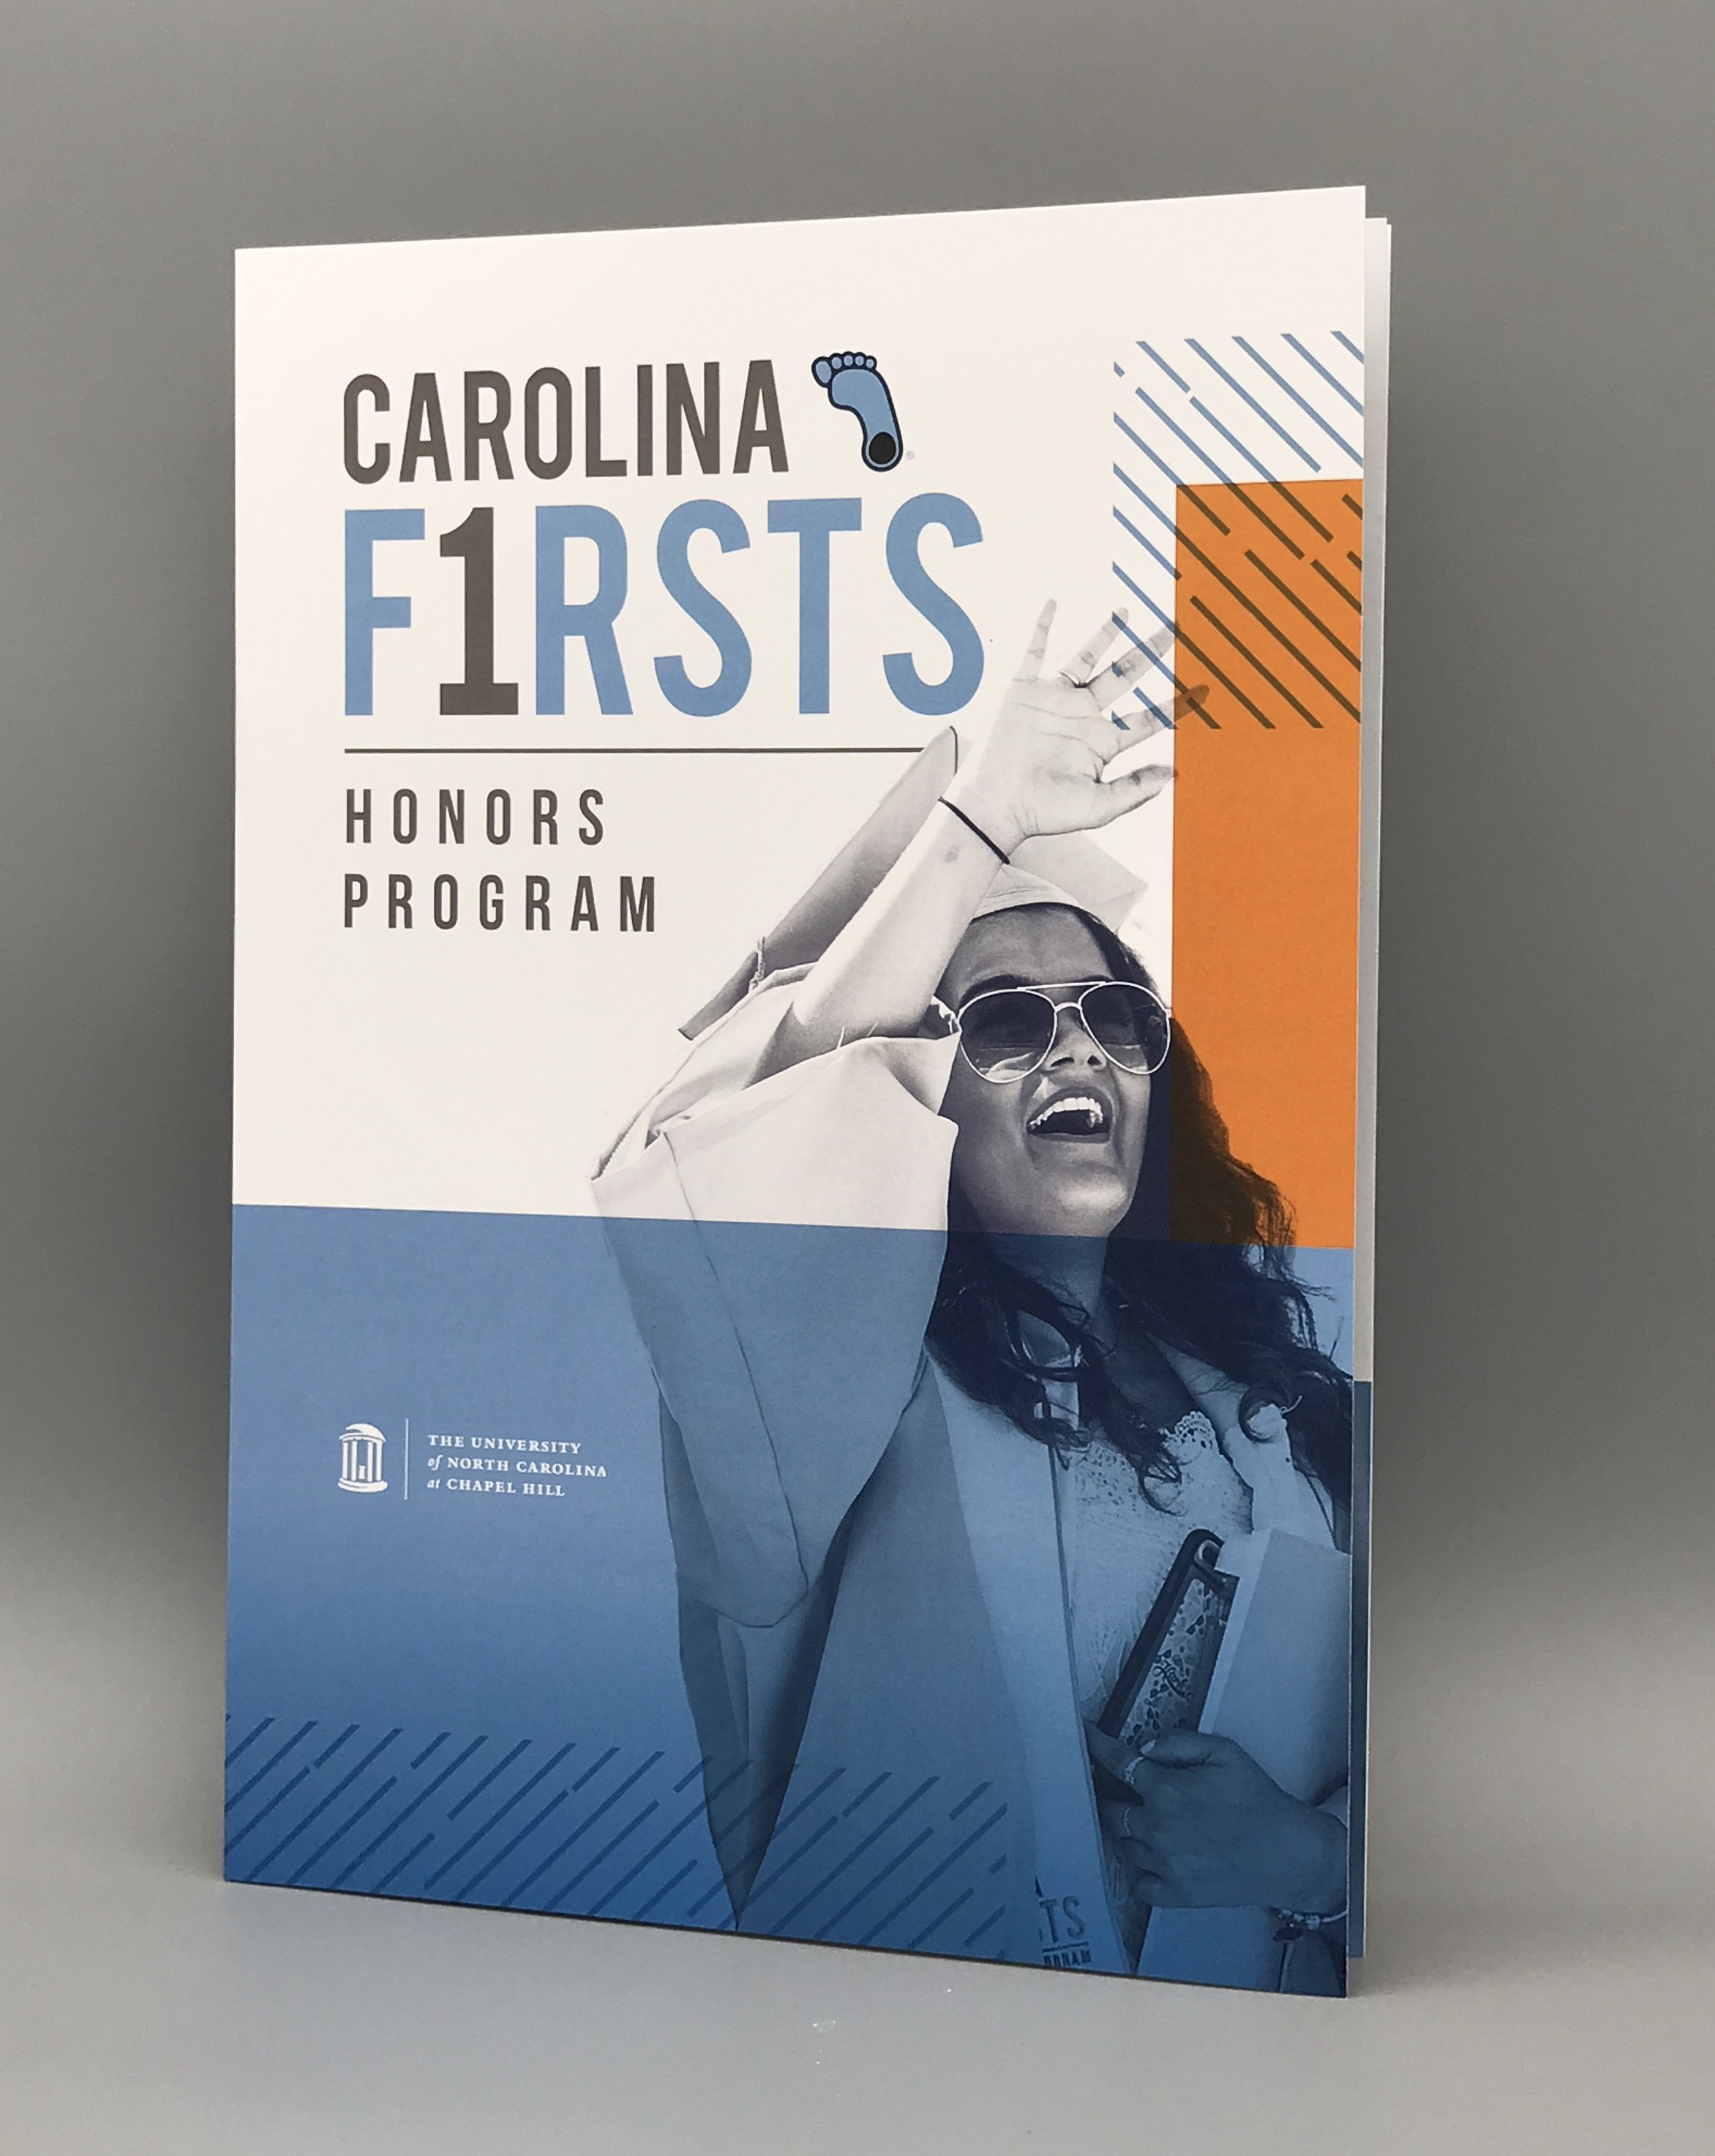 Photograph of the Carolina Firsts booklet, featuring the Carolina Firsts logo and black and white photo of a female graduate wearing her commencement robe.